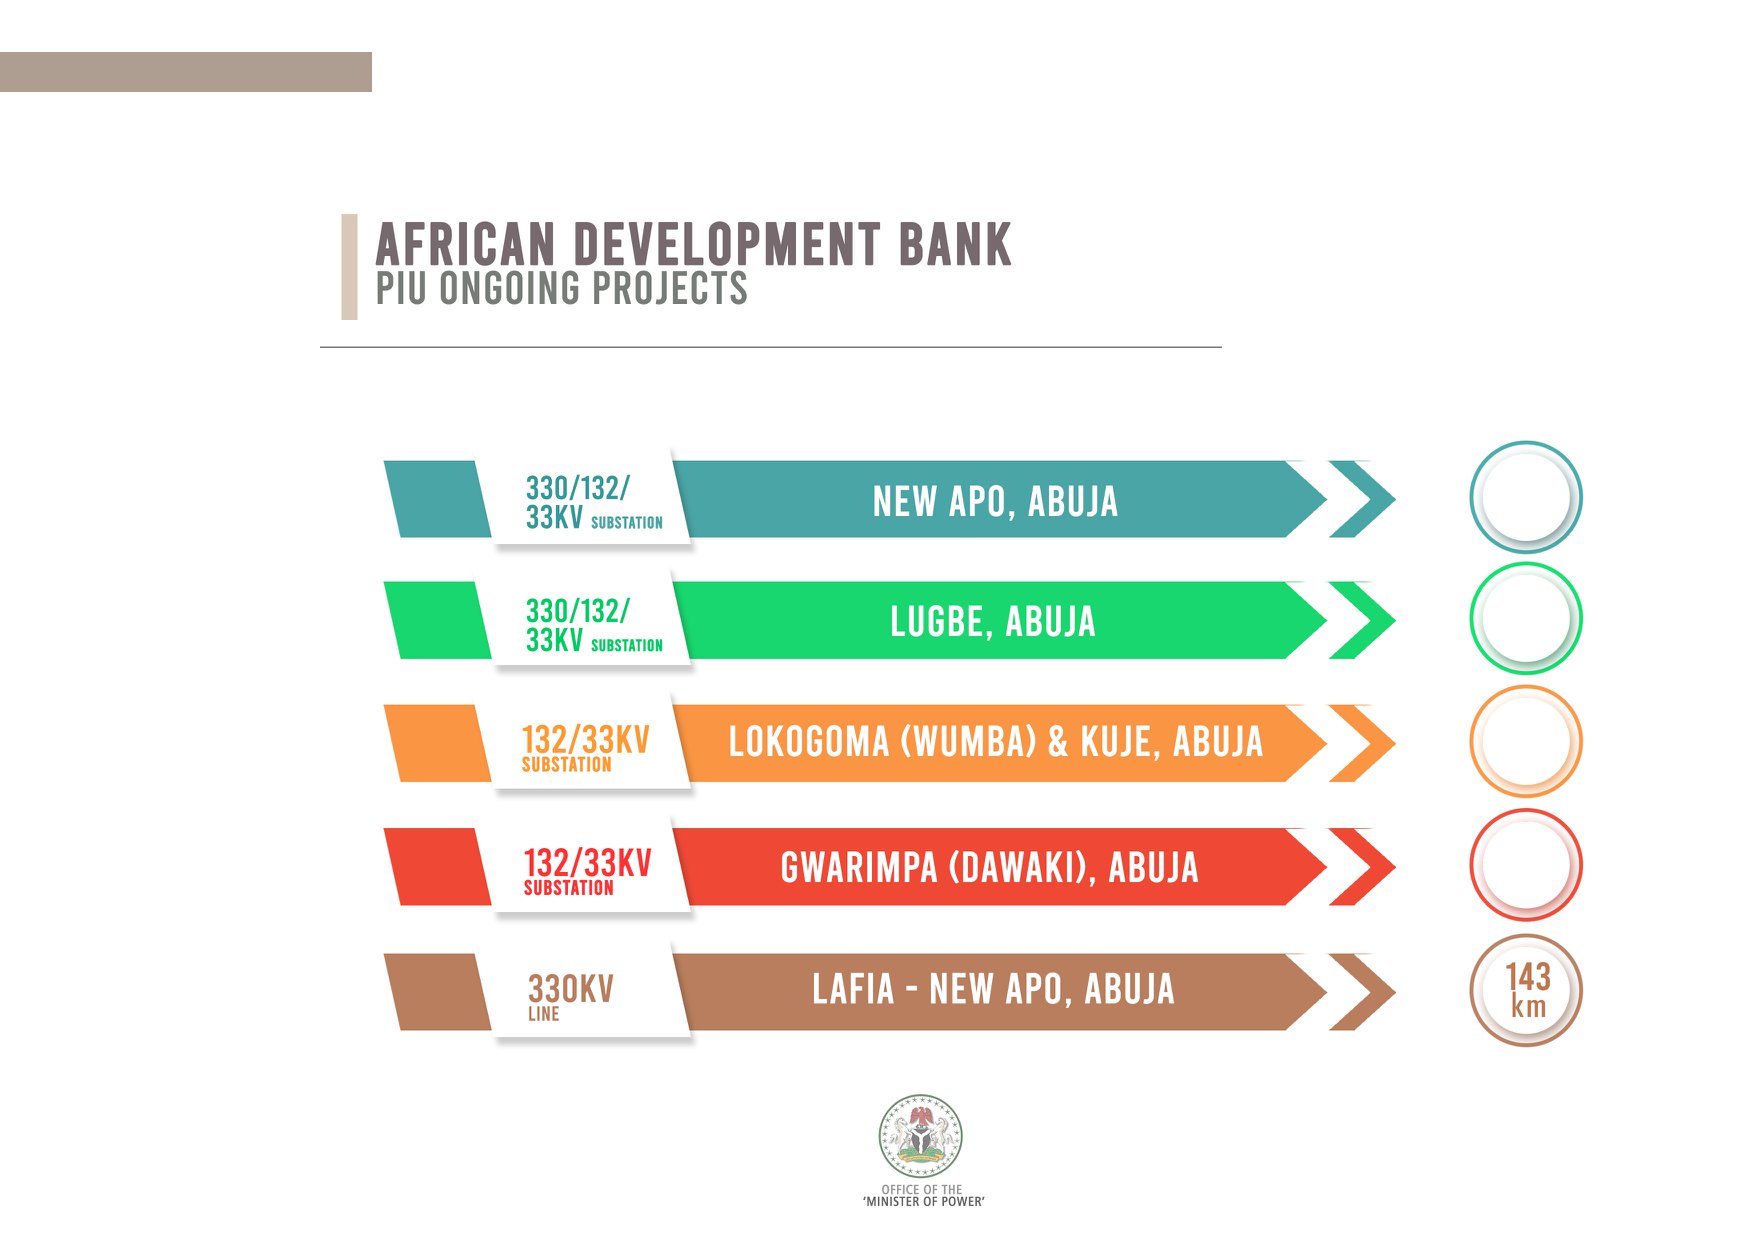 Power Ministry Projects with African Development Bank